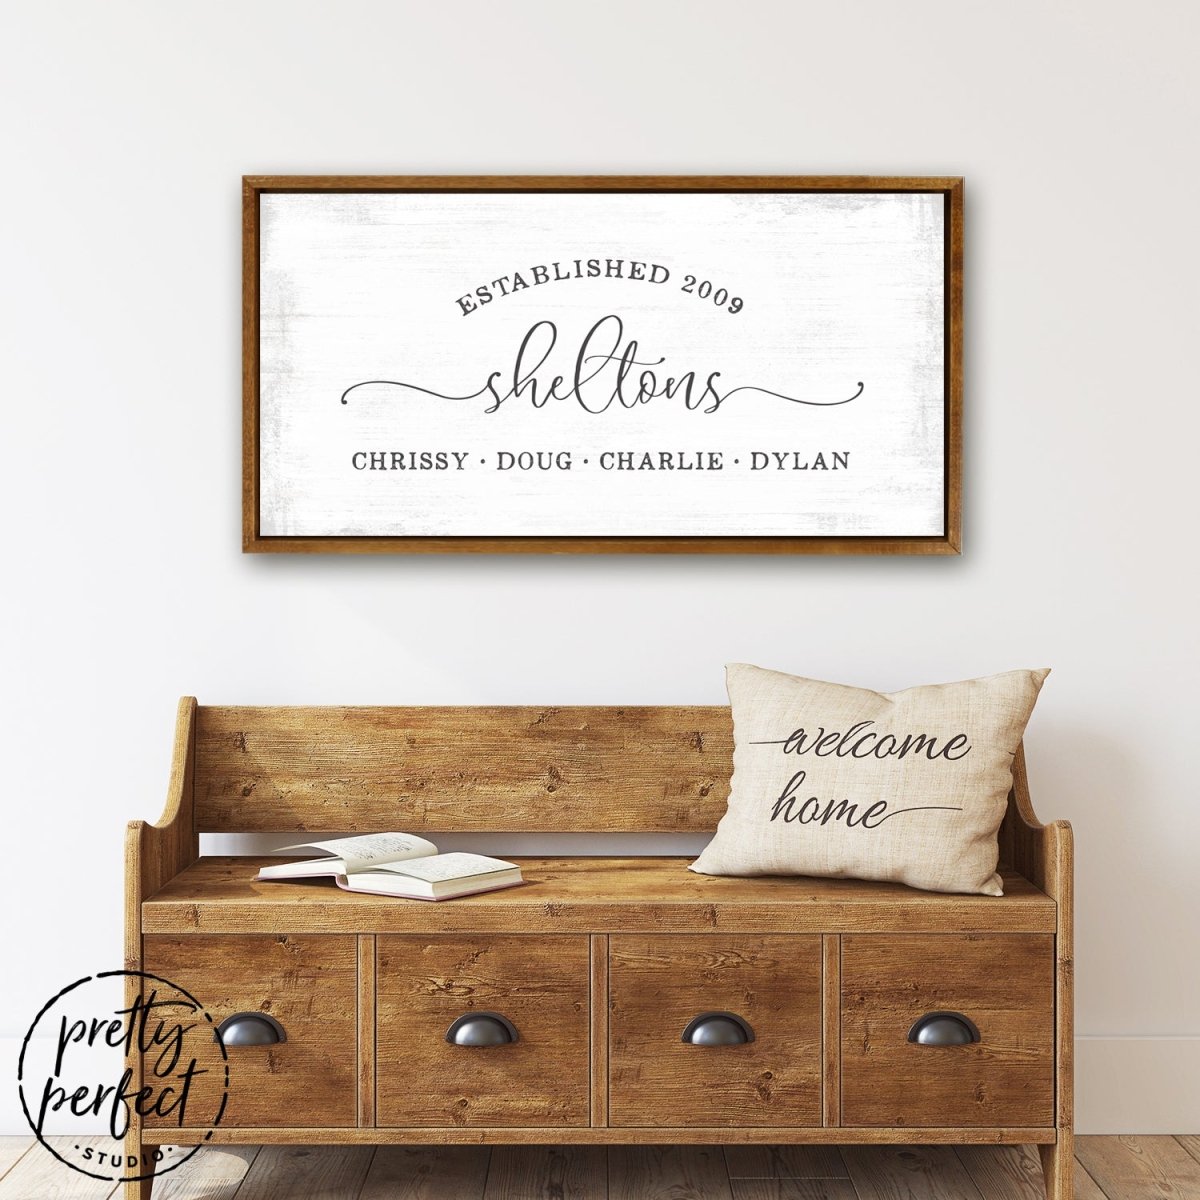 Personalized Family Names Wall Art With Established Date Above Entryway Bench - Pretty Perfect Studio